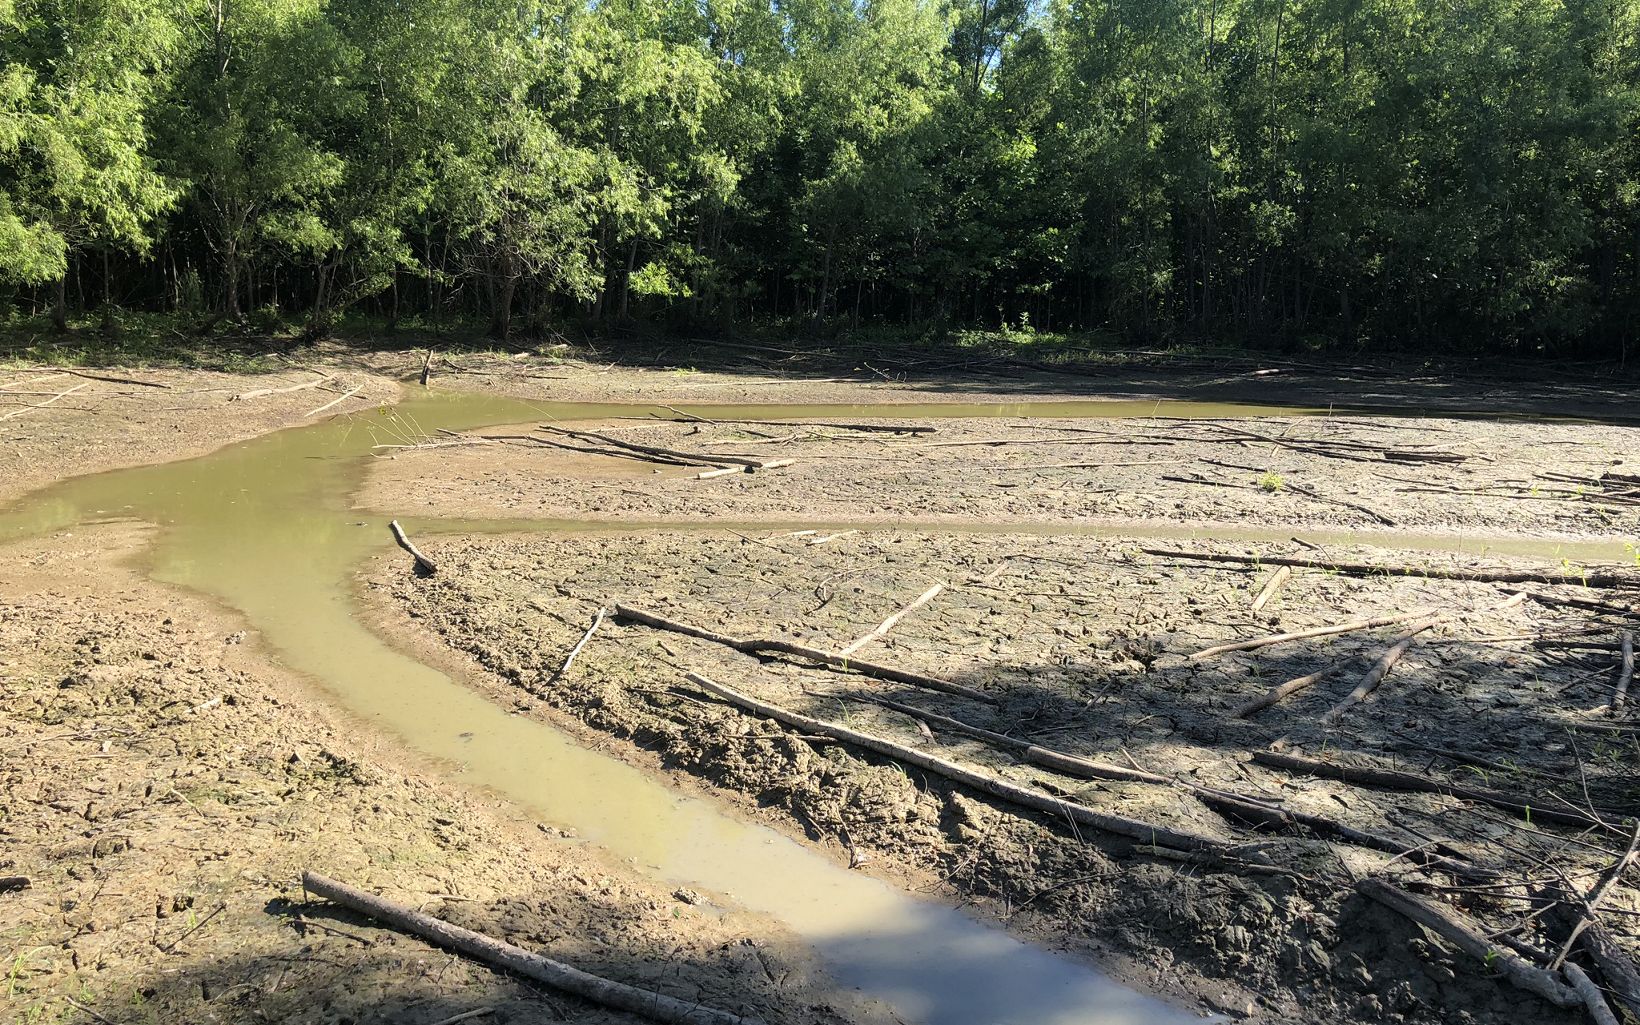 
                
                   Study samples were gathered from locations like this drying shallow water area on a restored wetland easement in Obion County, TN, part of the Mississippi River Basin.
                  
                
              